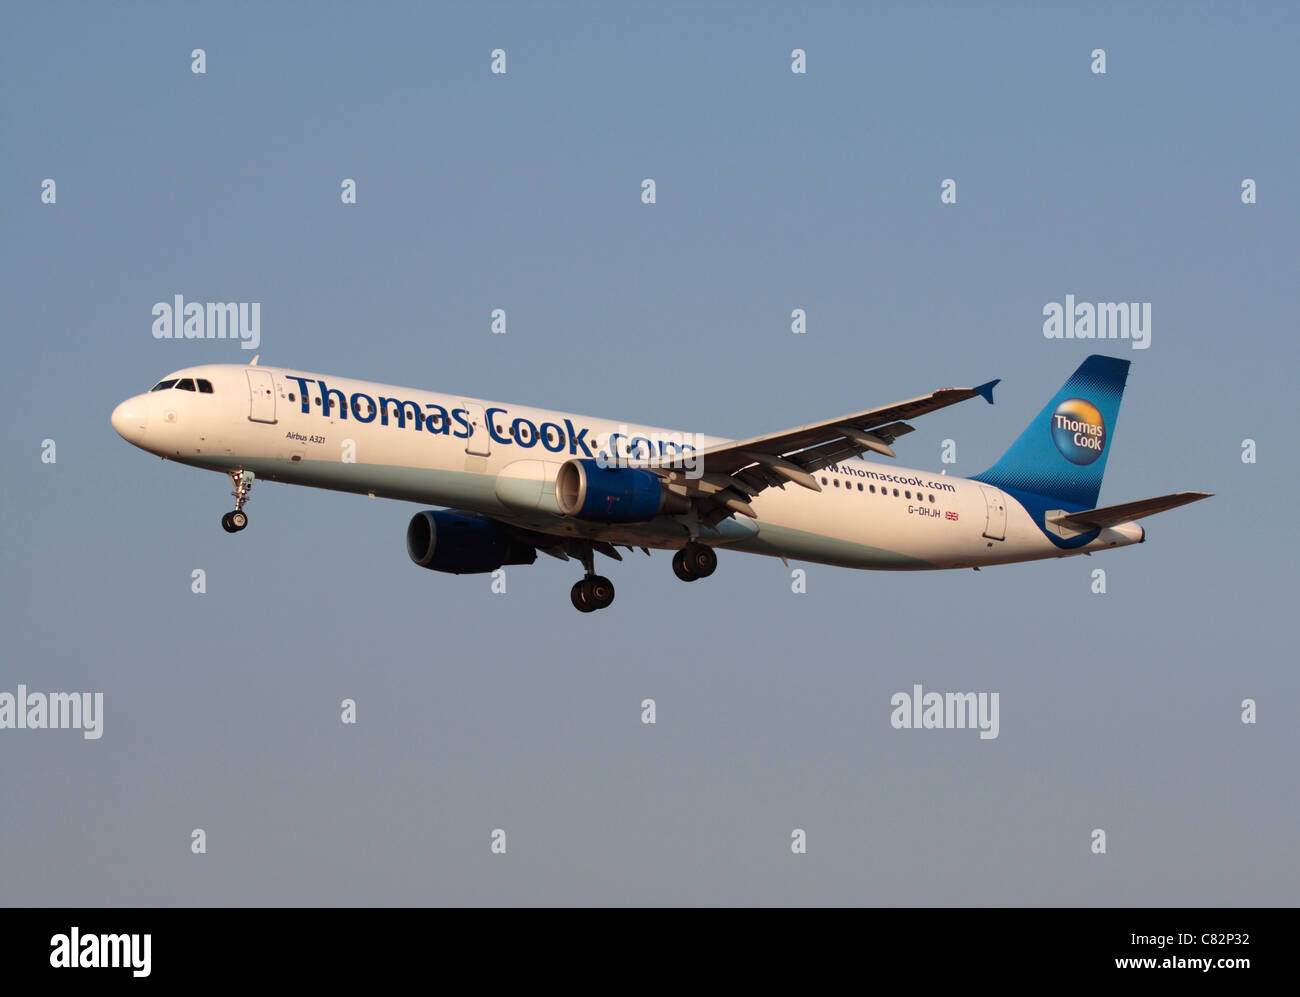 Thomas Cook Airlines Airbus A321 on approach against a clear blue sky Stock Photo